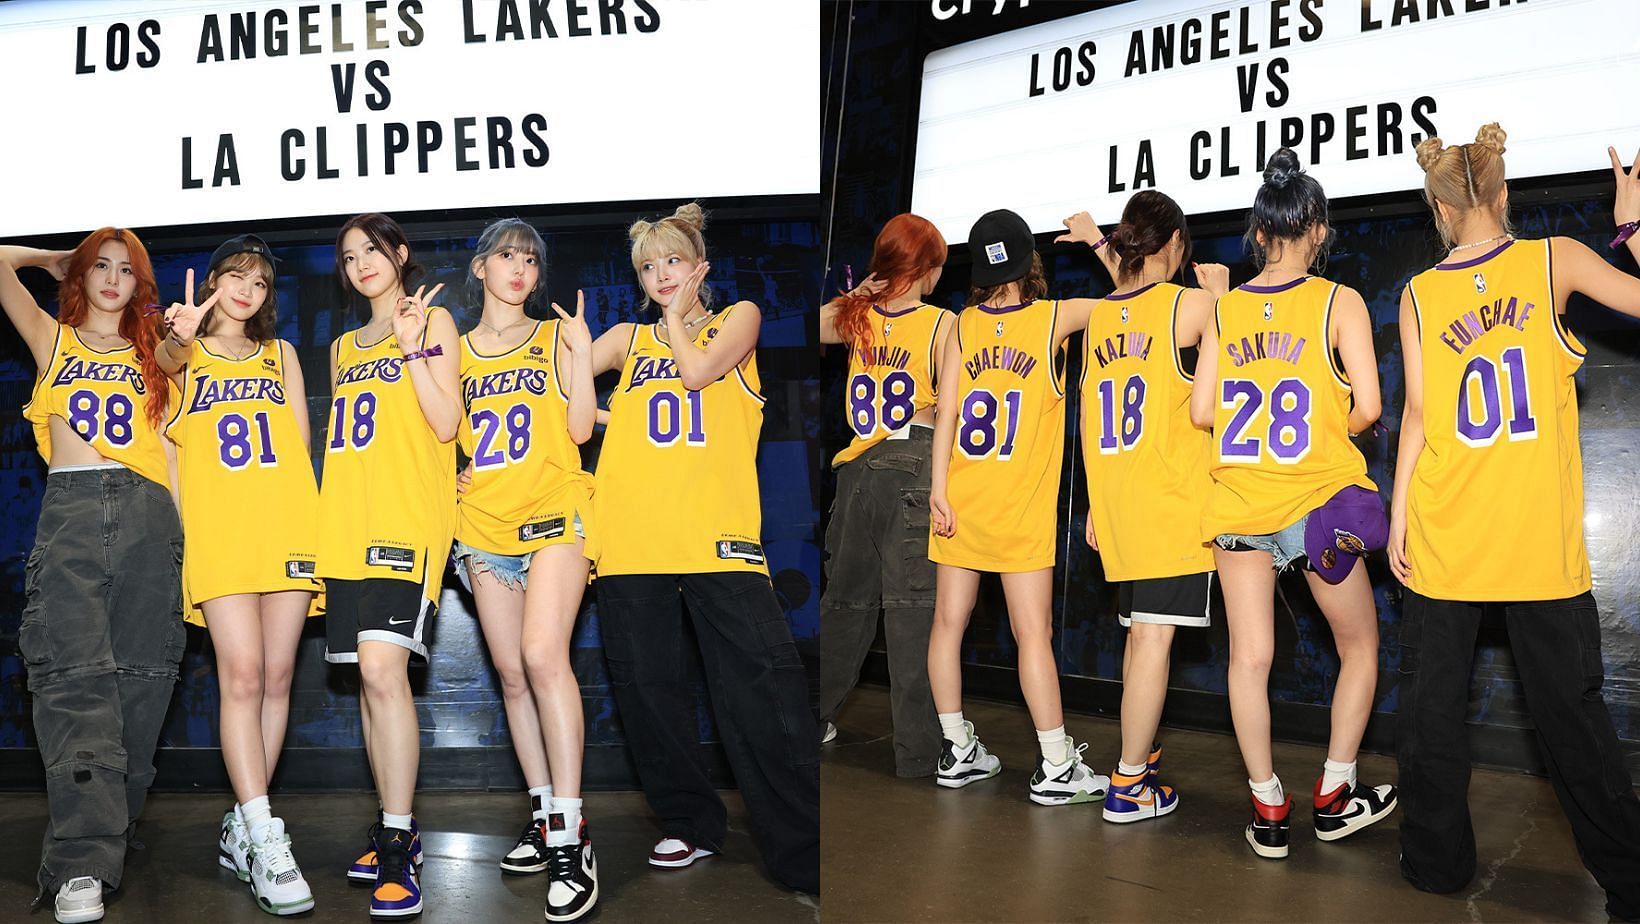 Featuring the K-Pop girl group LE SSERAFIM. (Images via @Lakers)